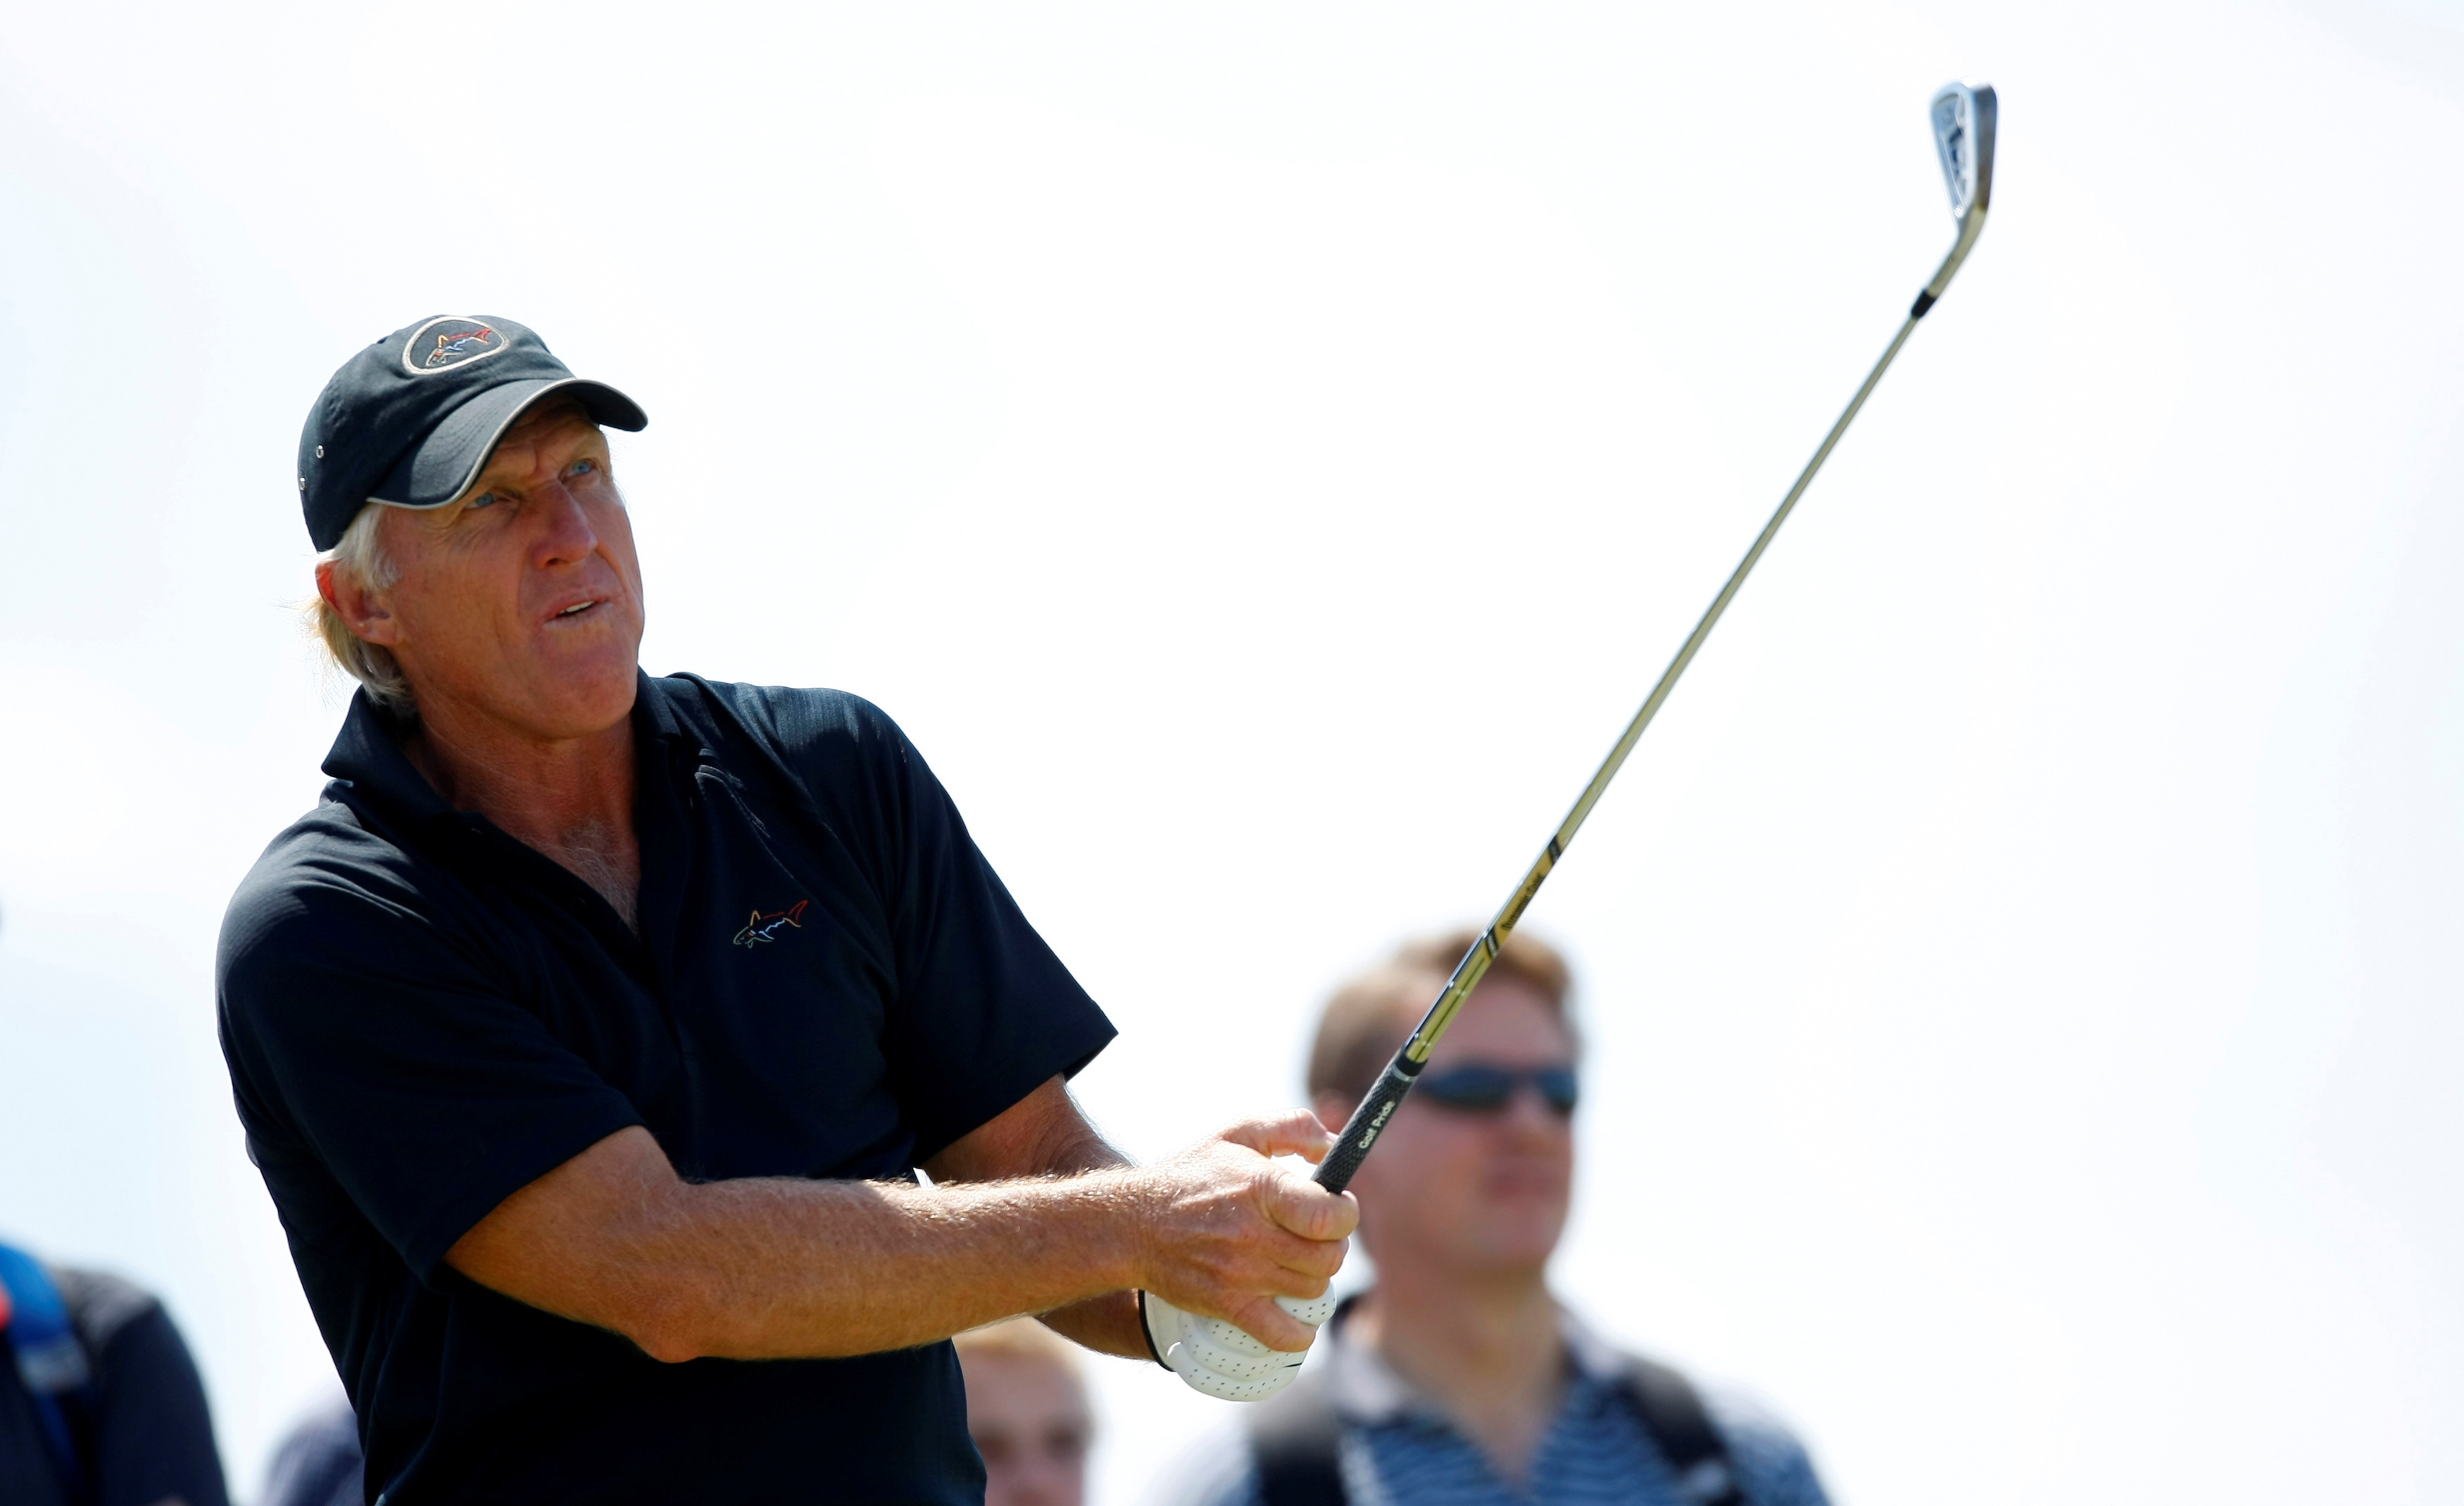 Greg Norman of Australia watches his tee shot during a practice round ahead of the British Open Golf Championship at the Turnberry Golf Club in Scotland